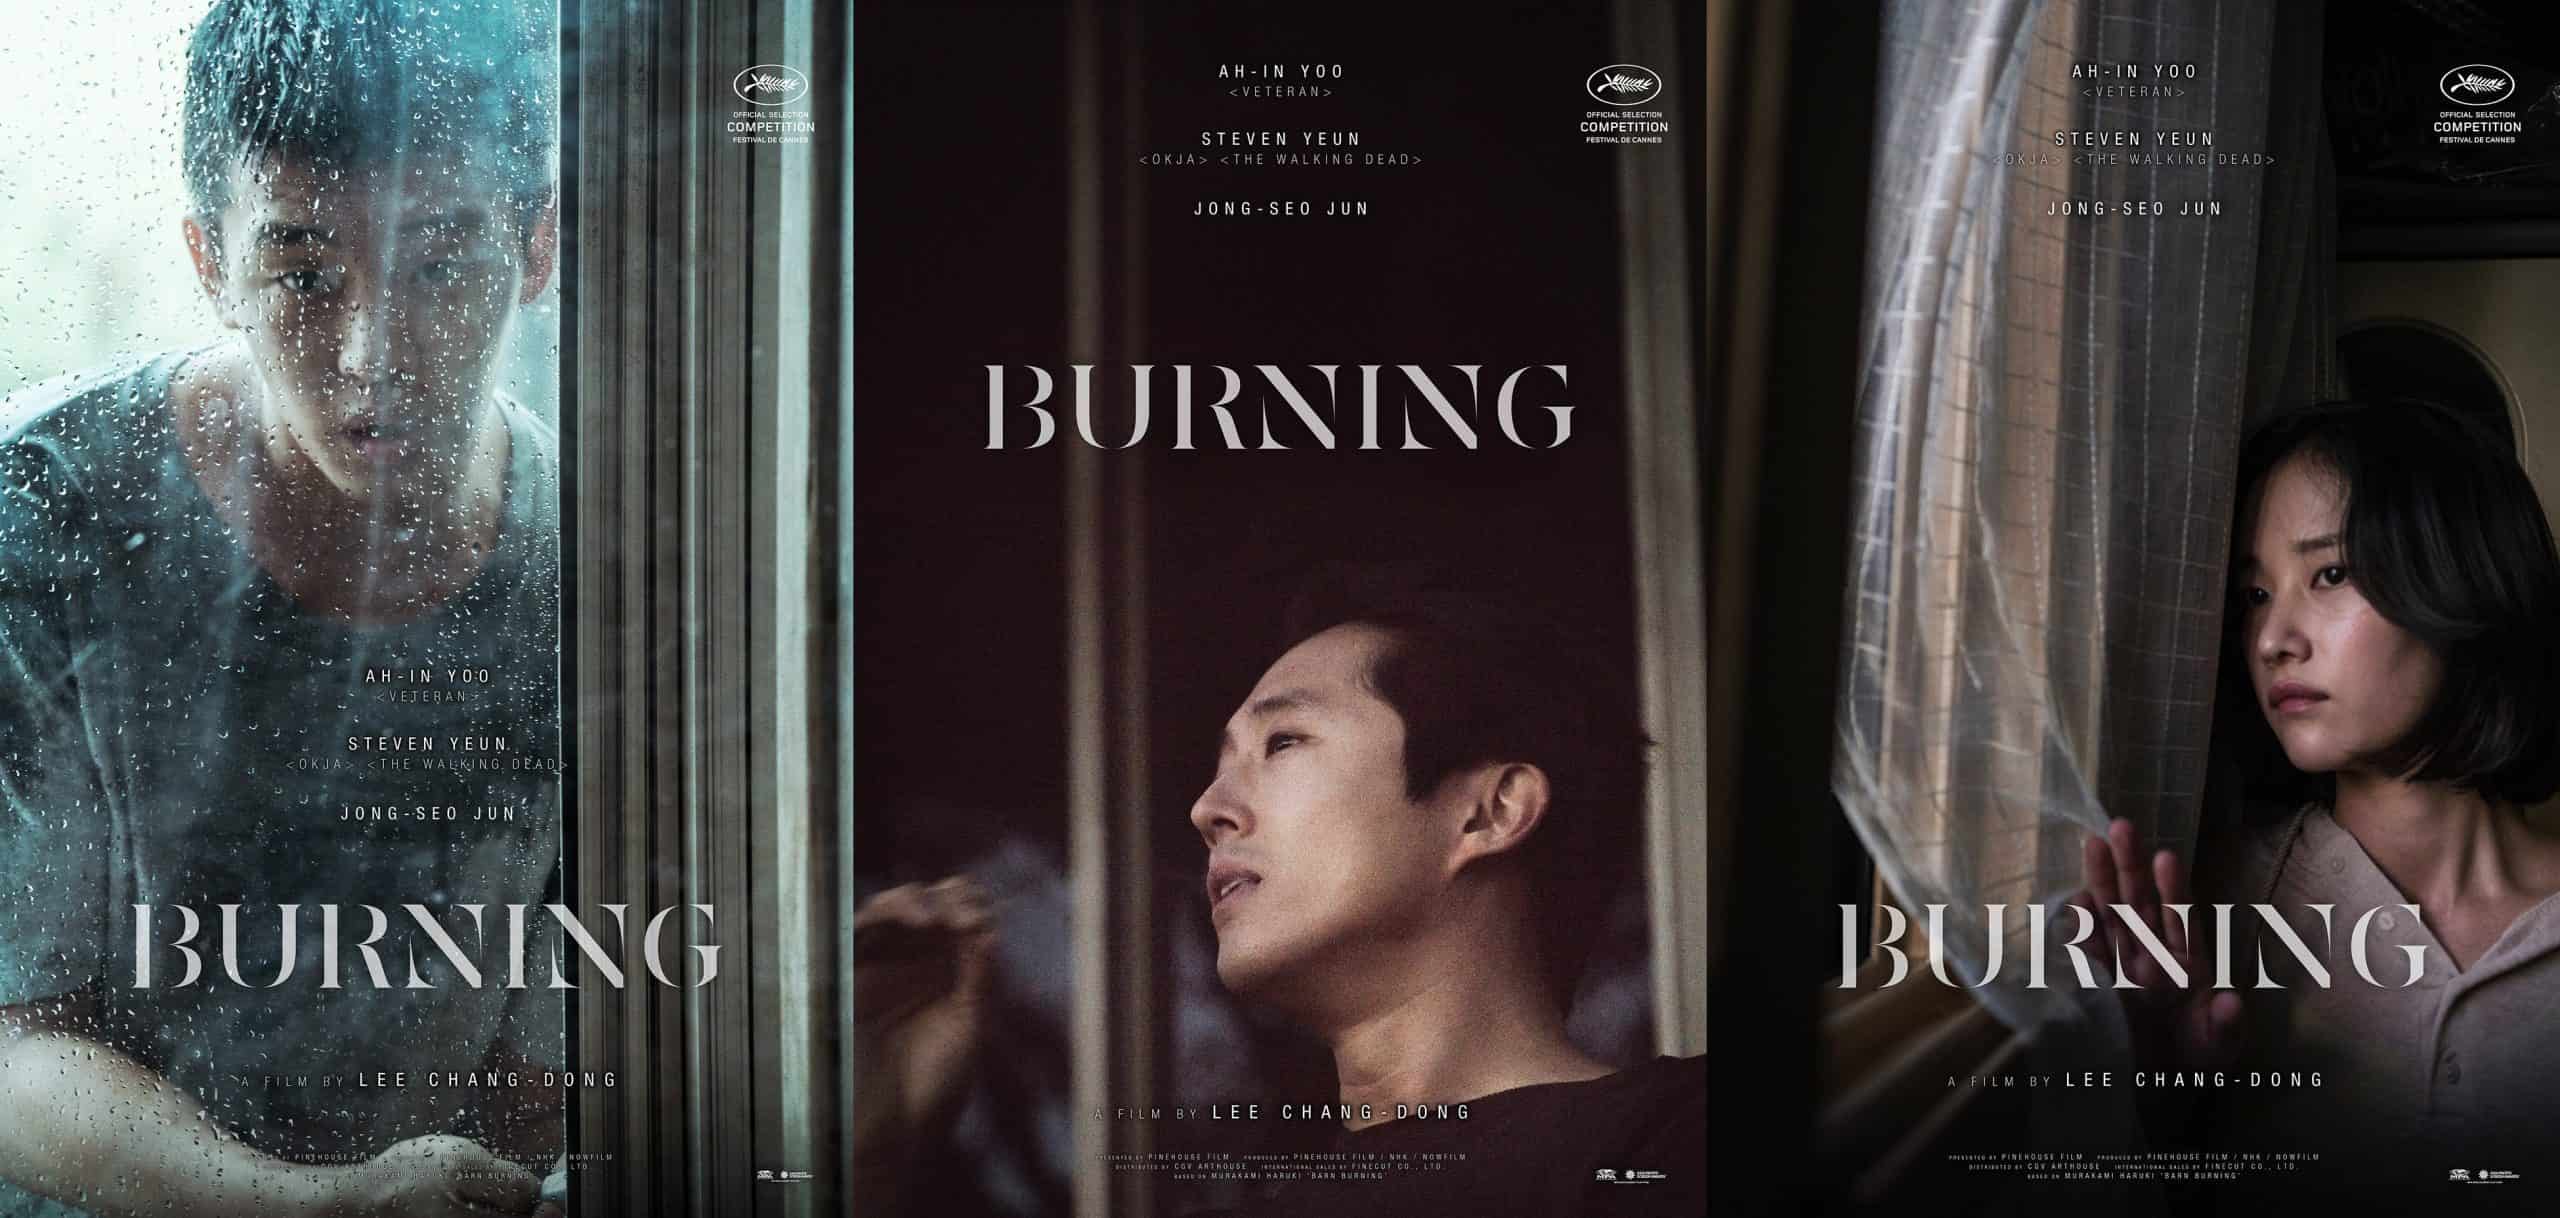 Lee Chang-dong co-wrote, produced, and directed the psychological thriller Burning.